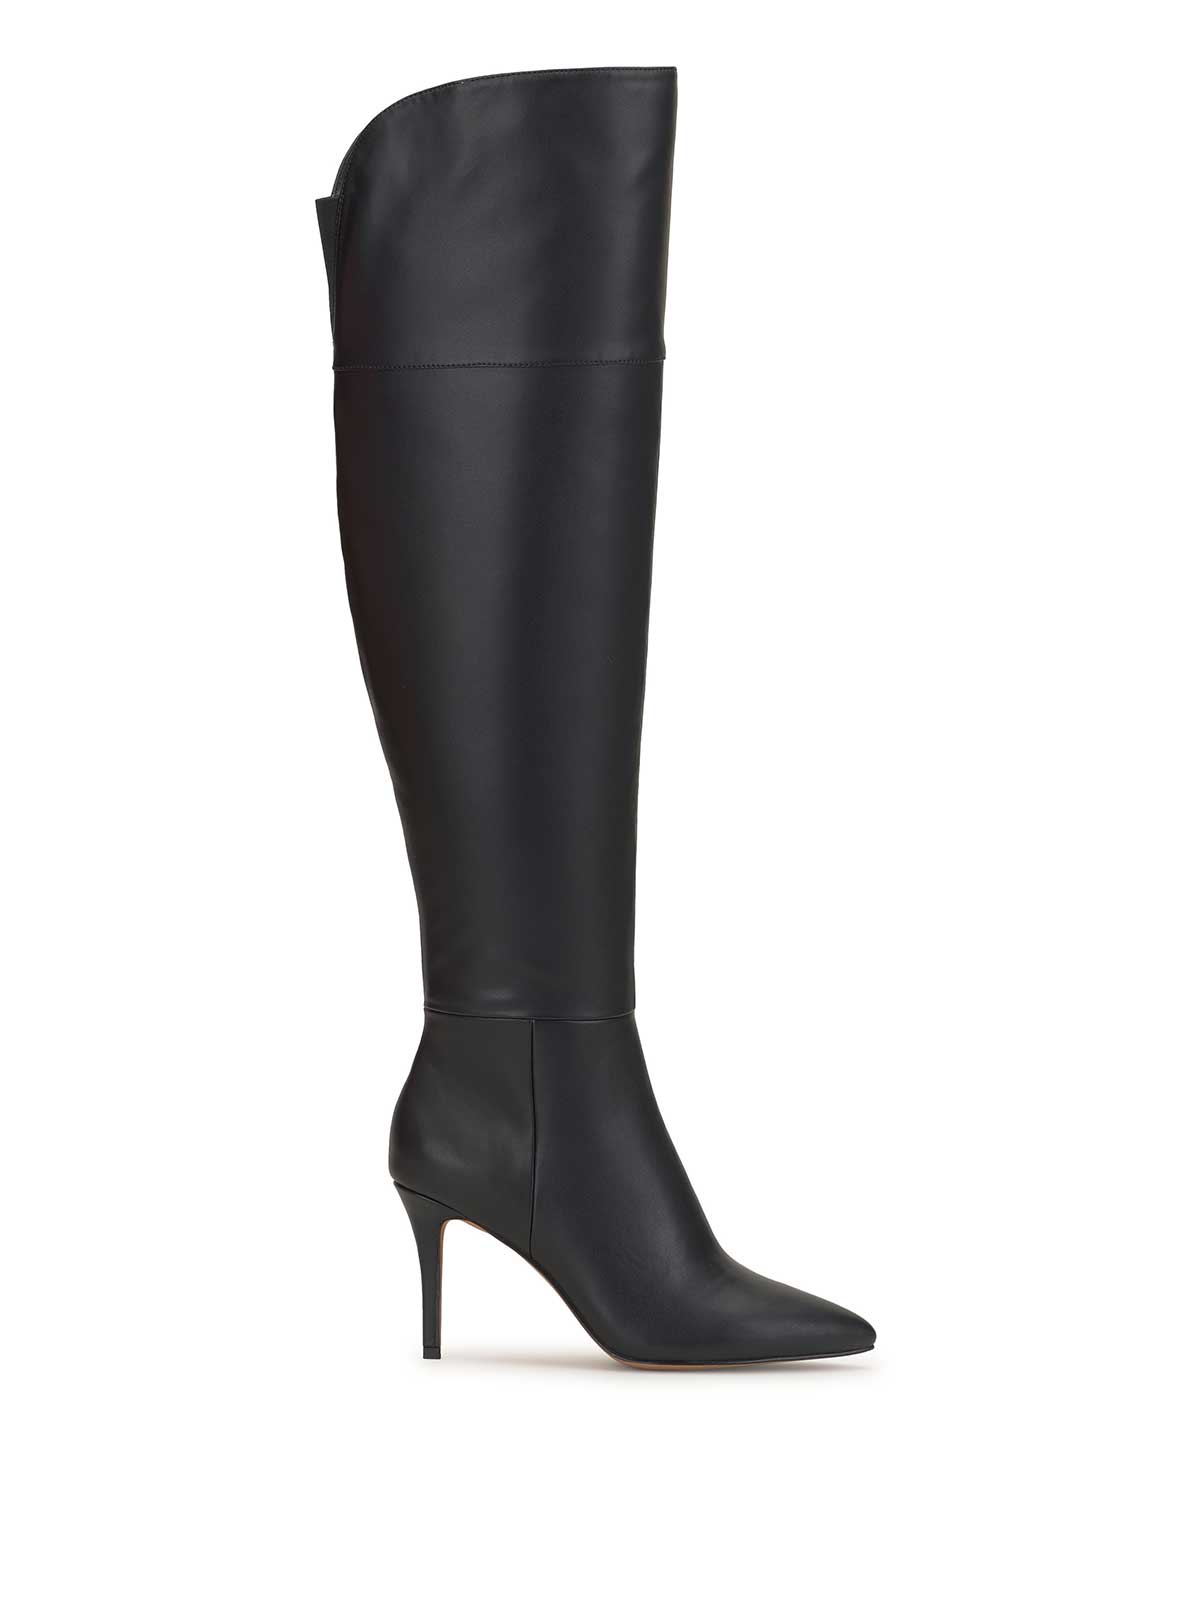 Adysen Boot in Black Leather – Jessica Simpson